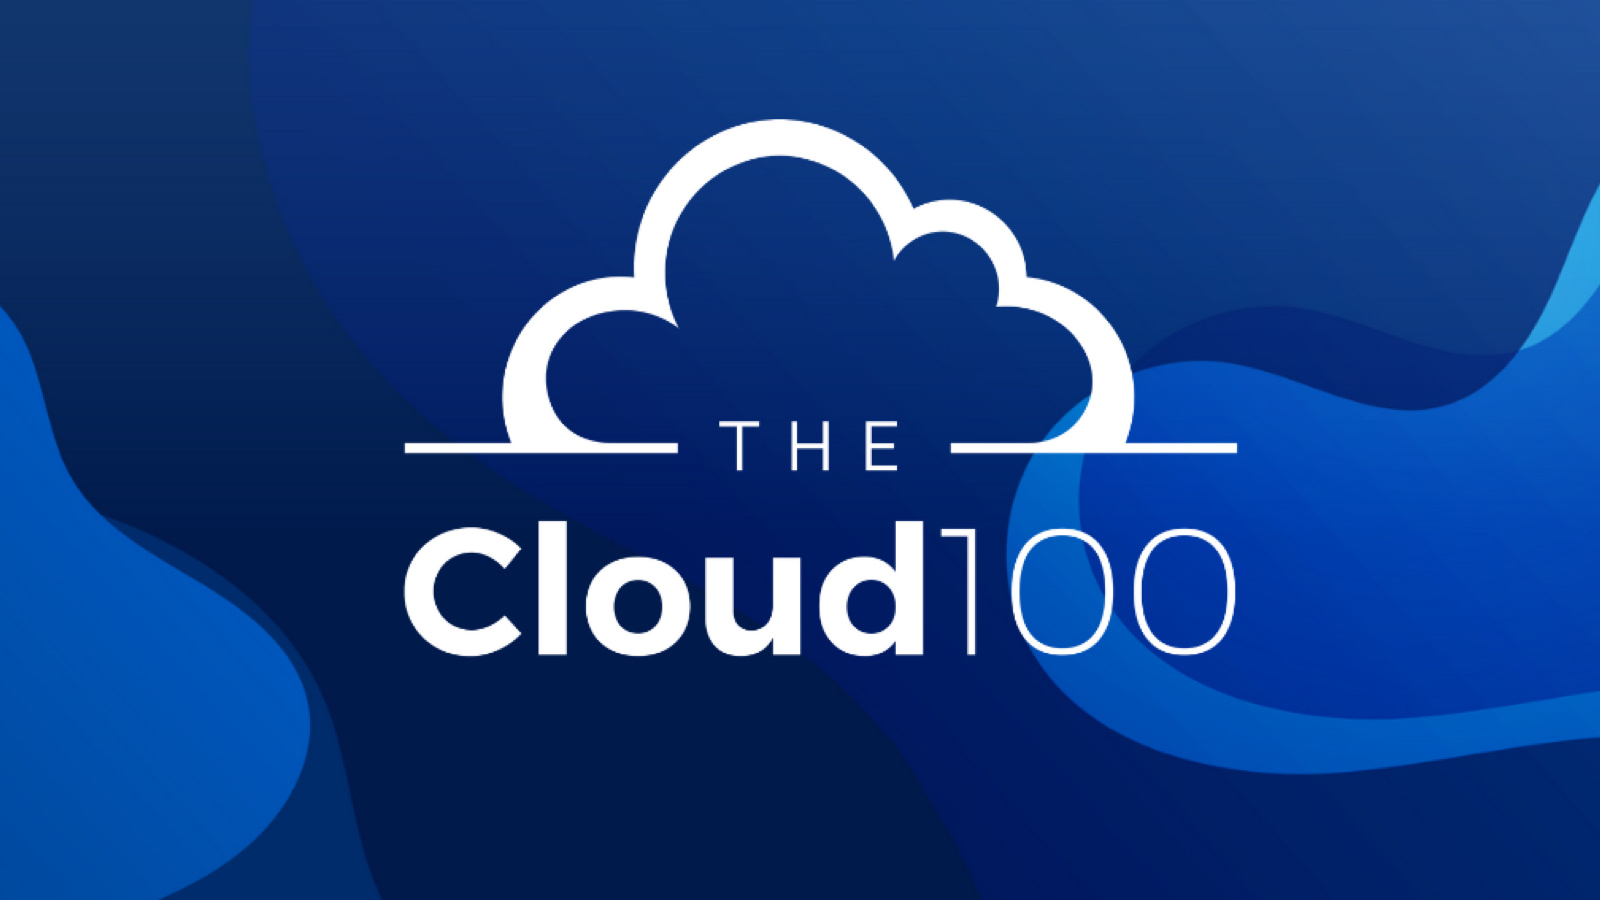 The Cloud 100 logo over blue background